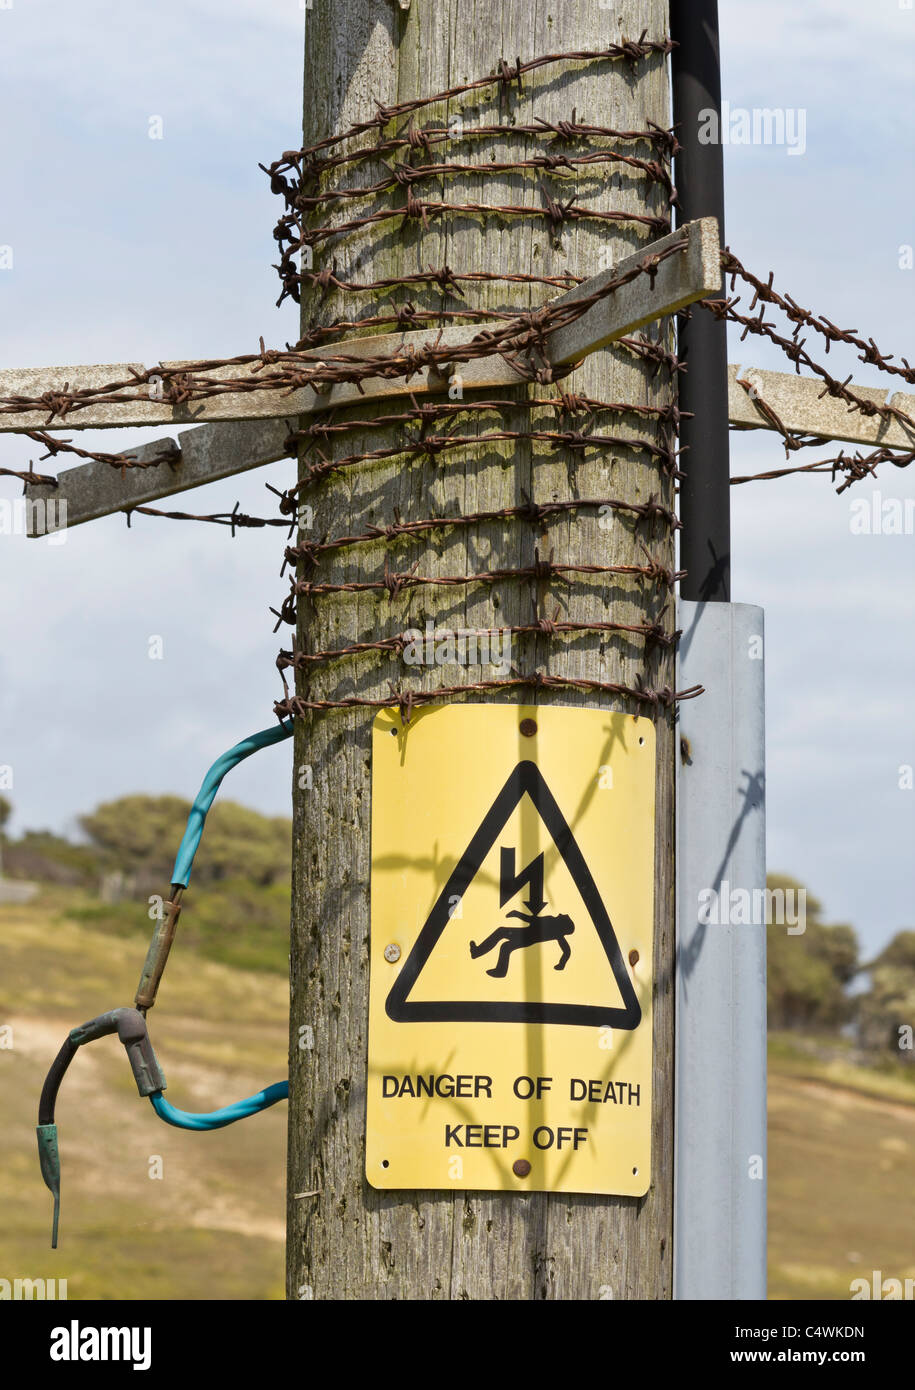 Danger of Death Keep Off sign on electricity pole pylon with barbed wire Stock Photo